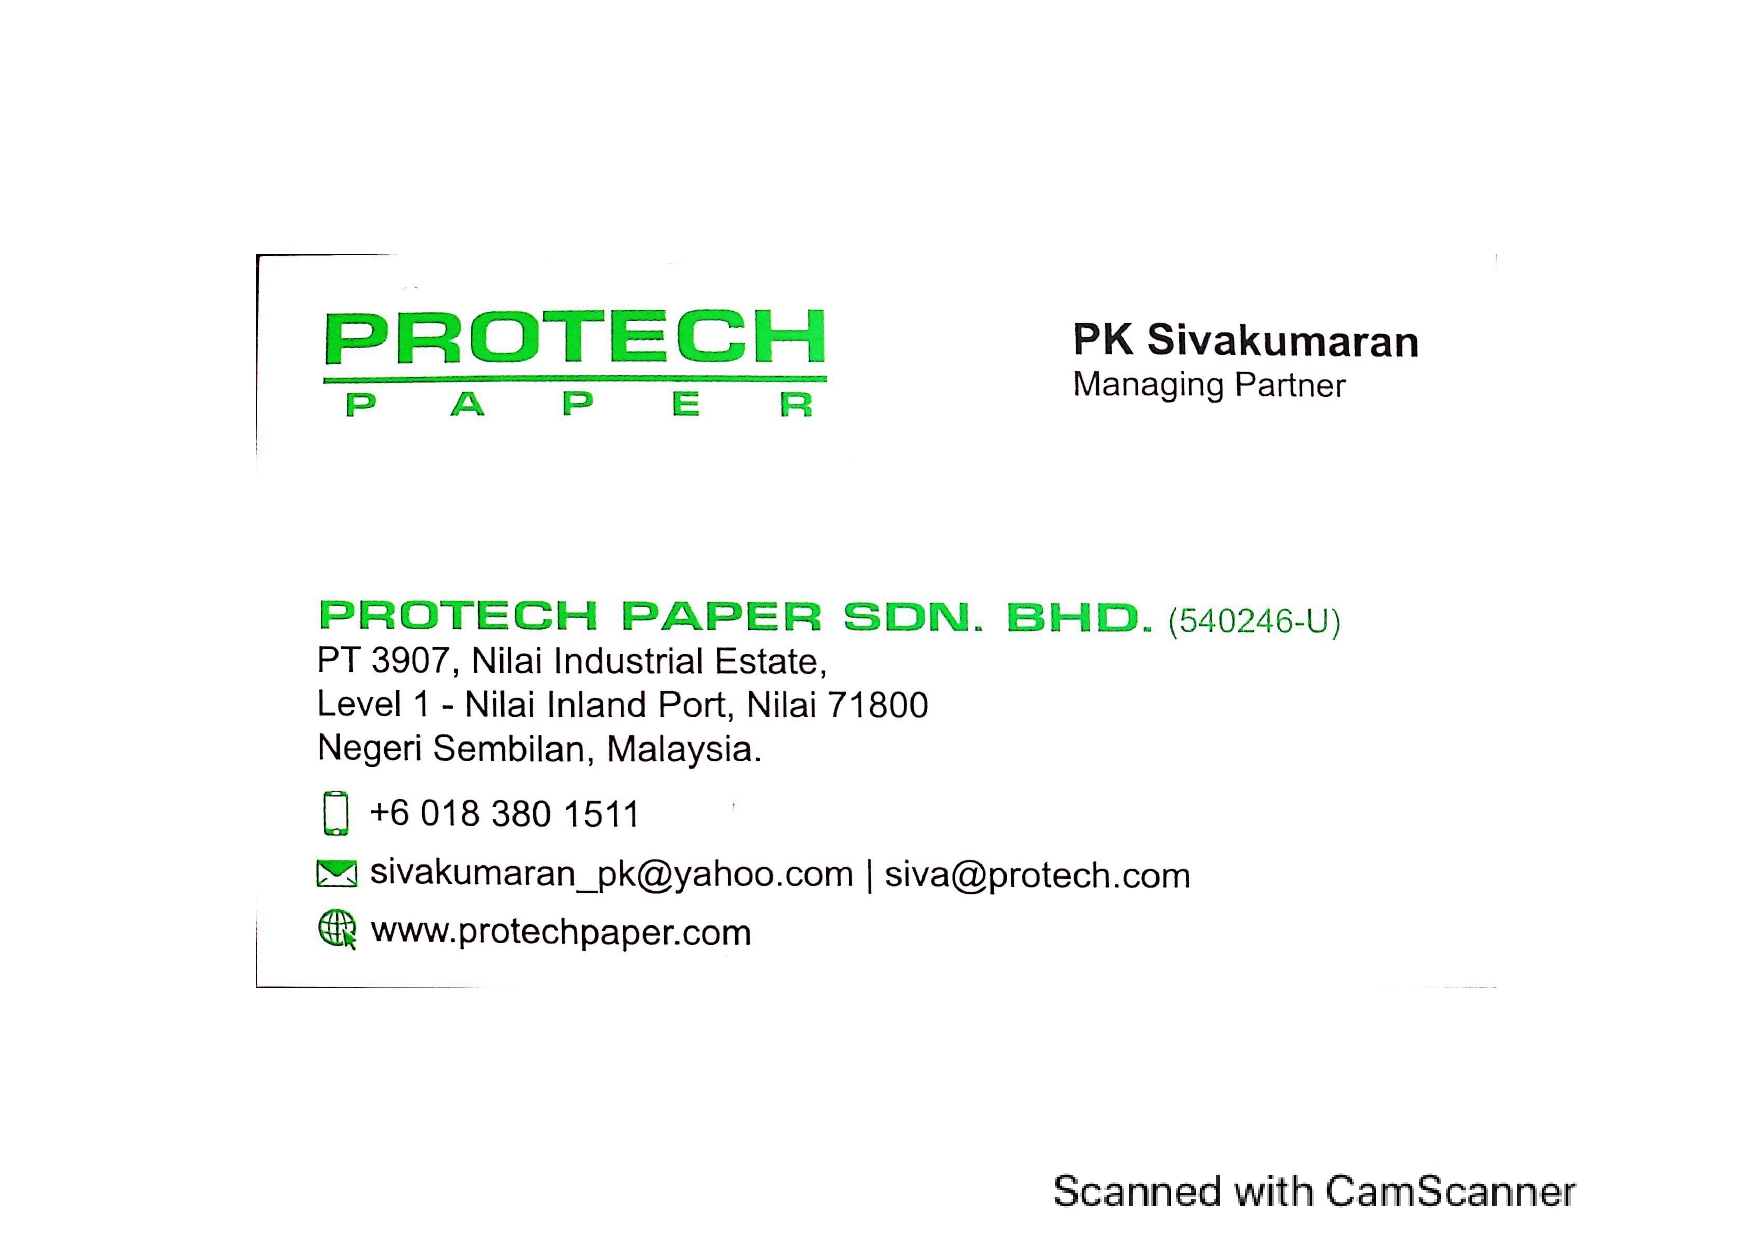 PROTECH PAPER SDN. BHD.